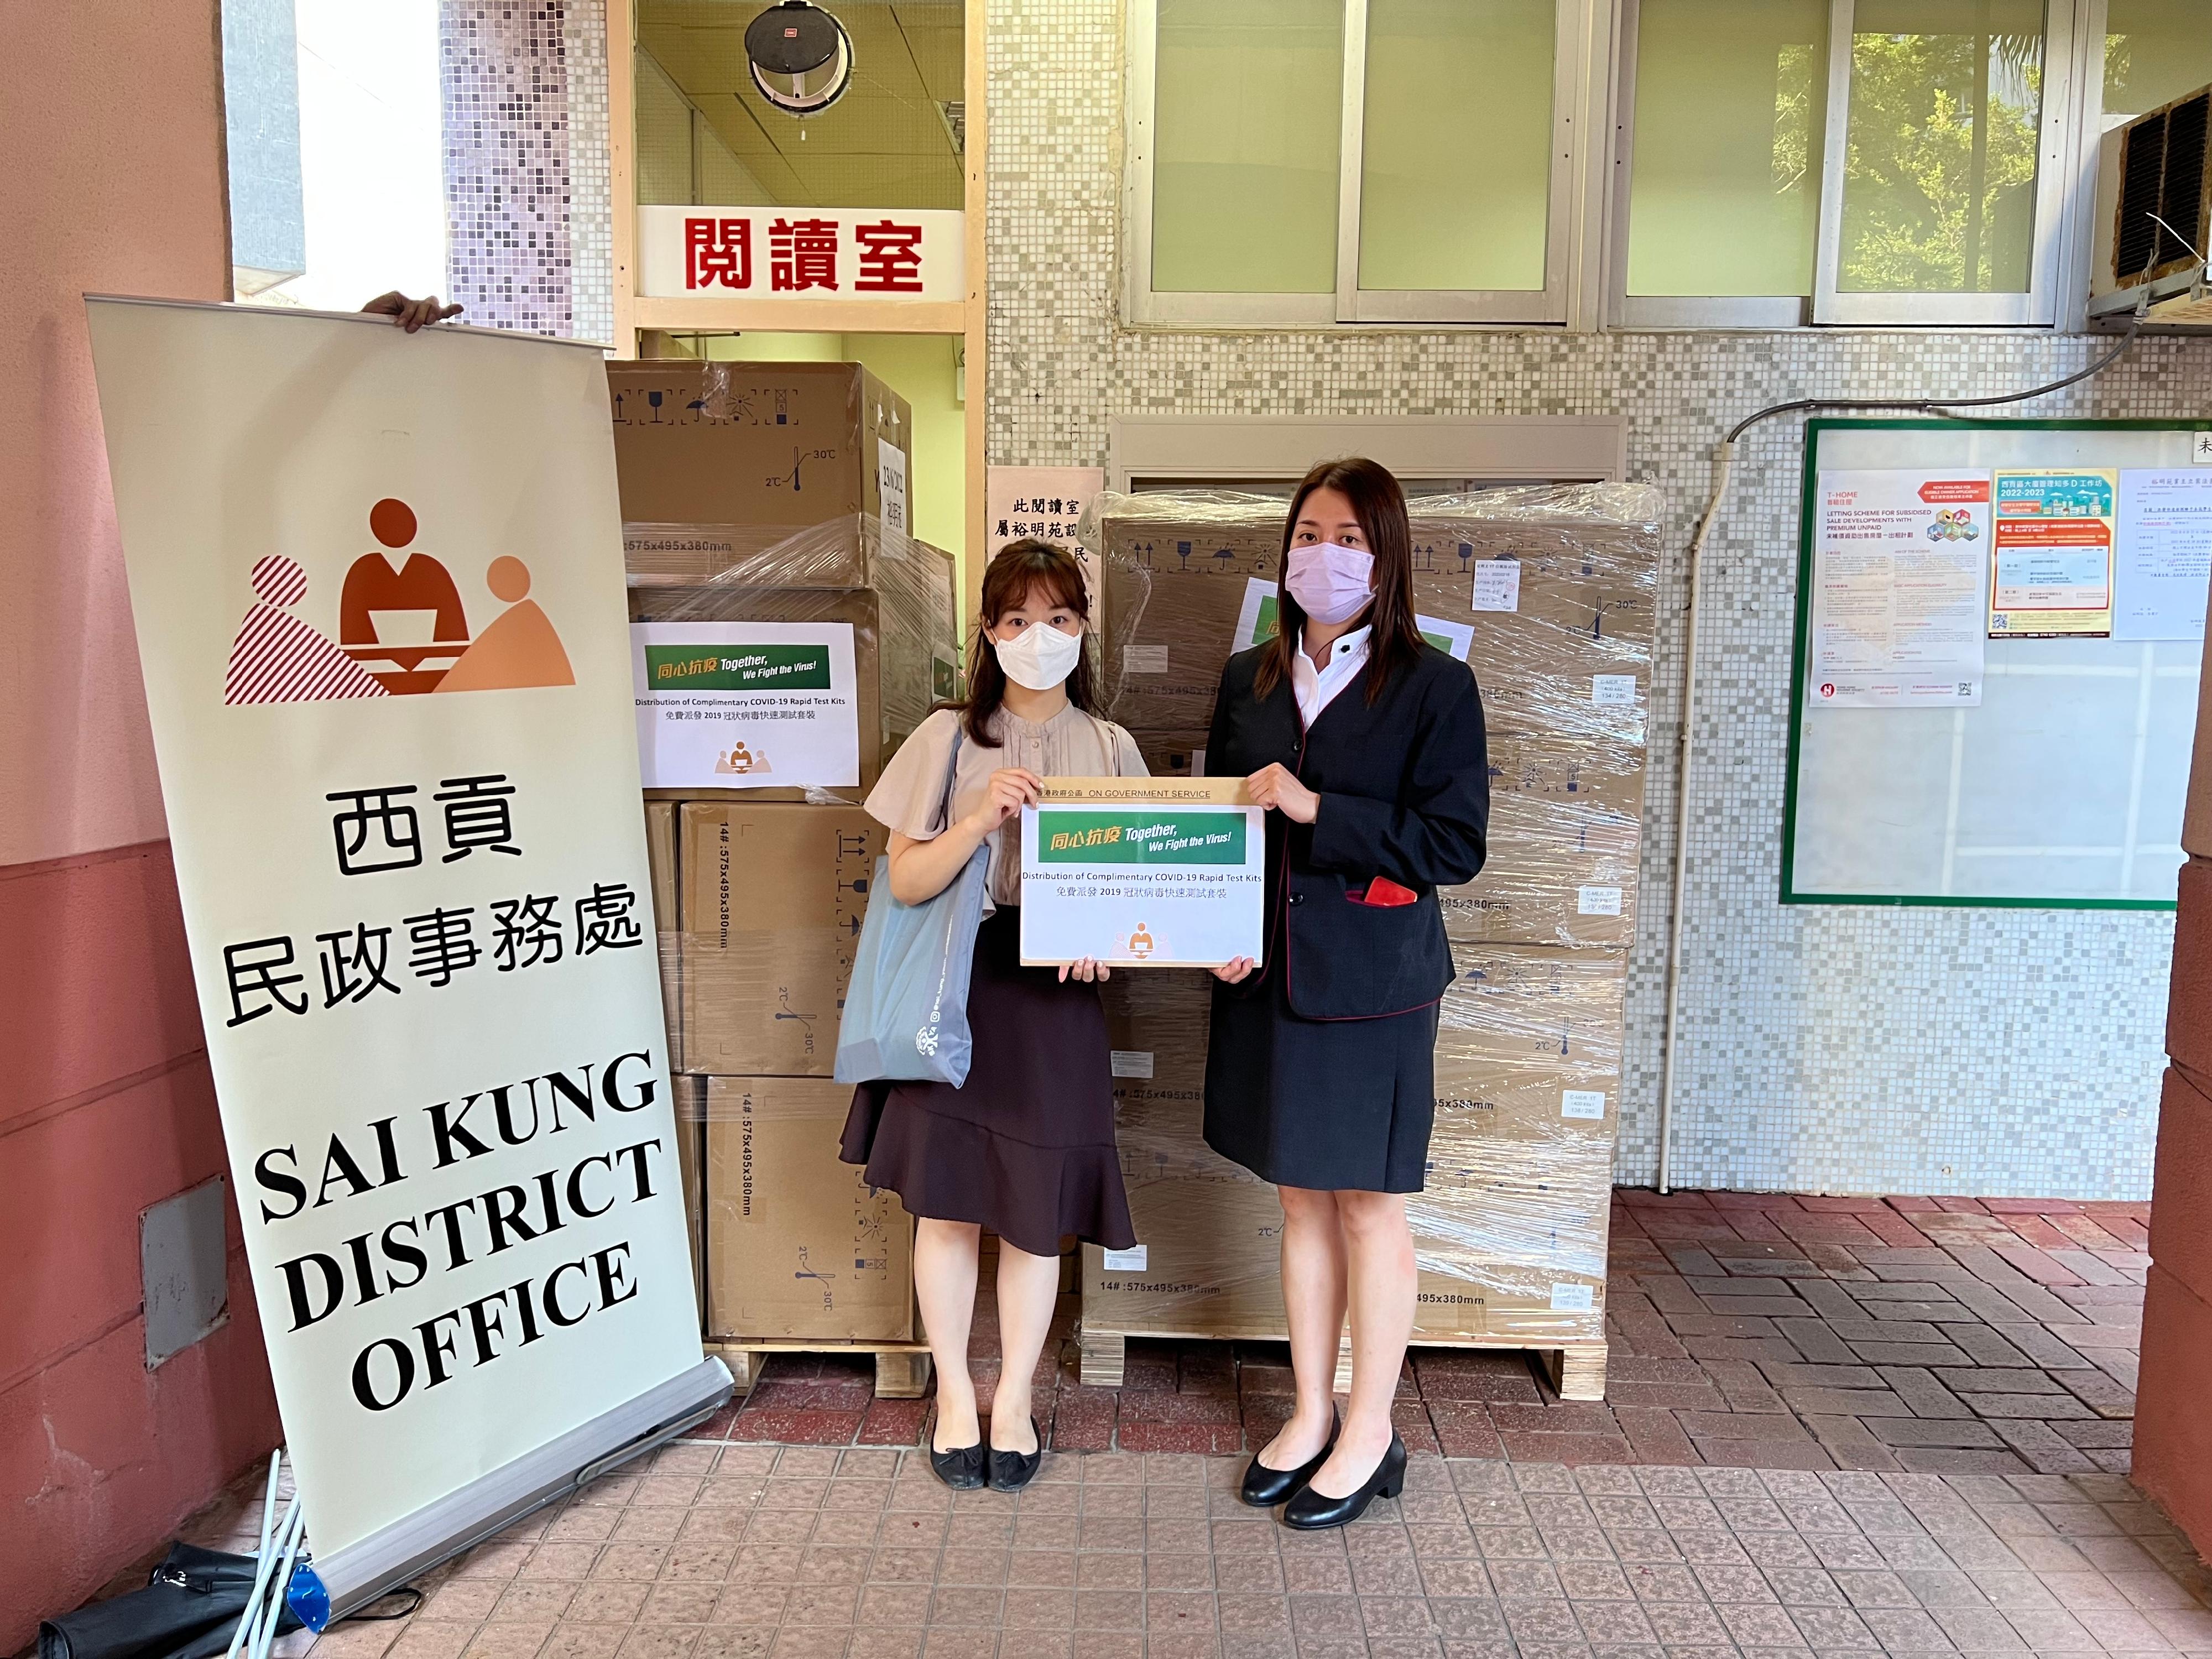 The Sai Kung District Office today (June 23) distributed COVID-19 rapid test kits to households, cleansing workers and property management staff living and working in Yu Ming Court for voluntary testing through the property management company.